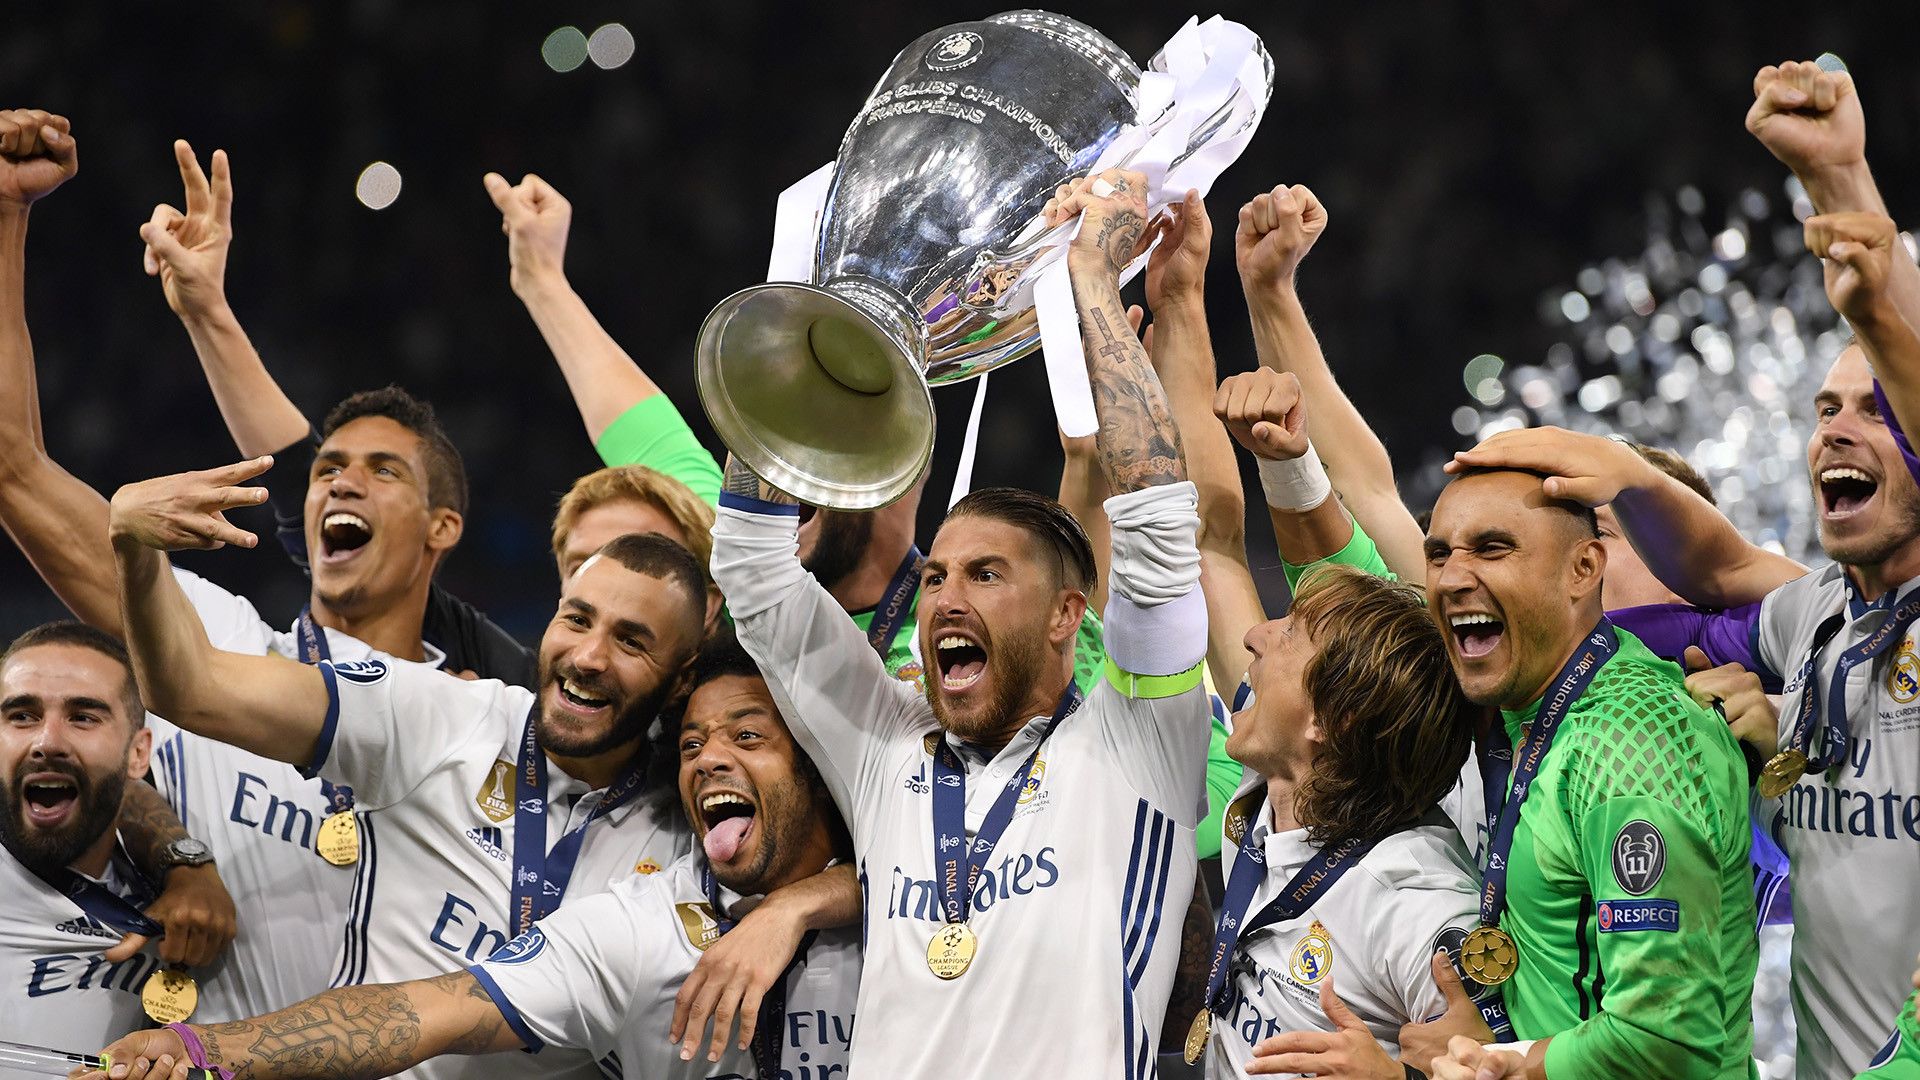 Free download Real Madrid Wallpaper 2018 - [1920x1080] for your Desktop, Mobile & Tablet. Explore France World Champions 2018 Wallpaper. France World Champions 2018 Wallpaper, Royals World Series